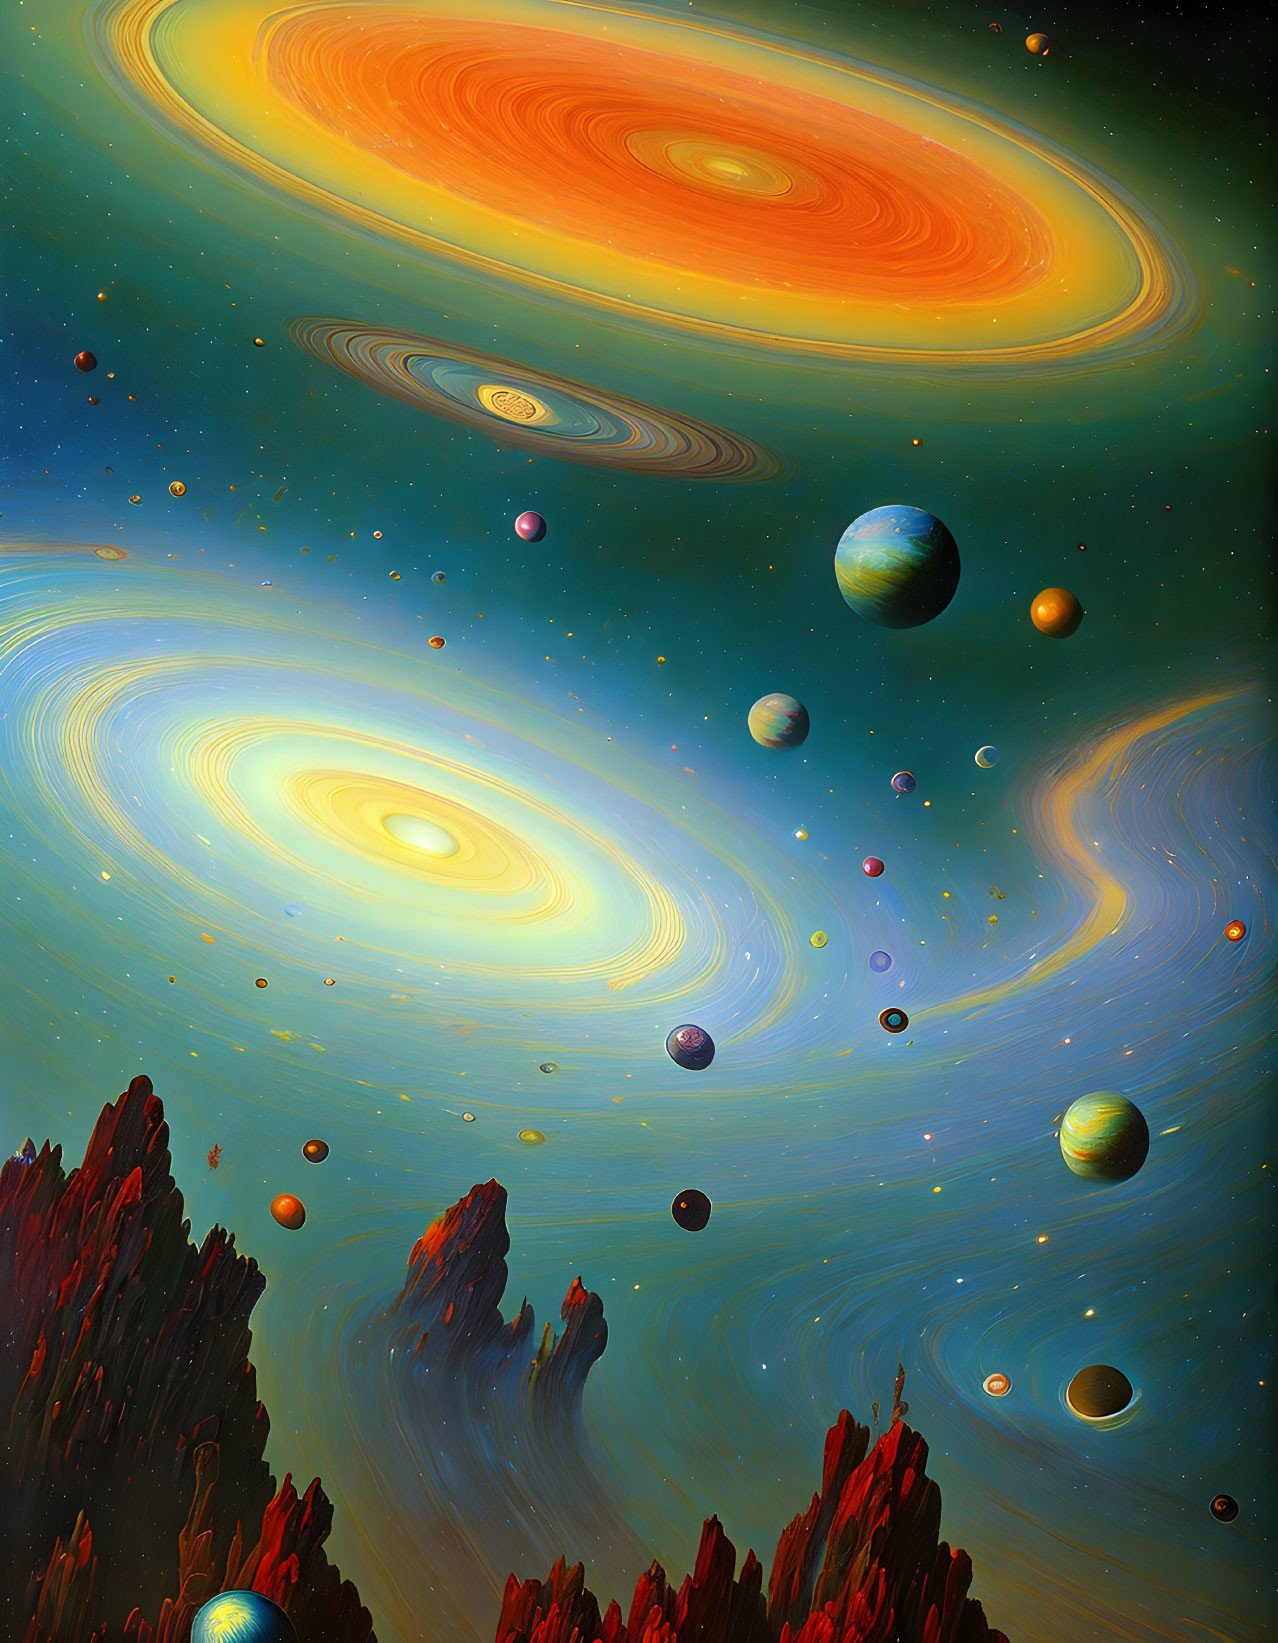 Colorful cosmic illustration with spiral galaxies, planets, and rocky formations